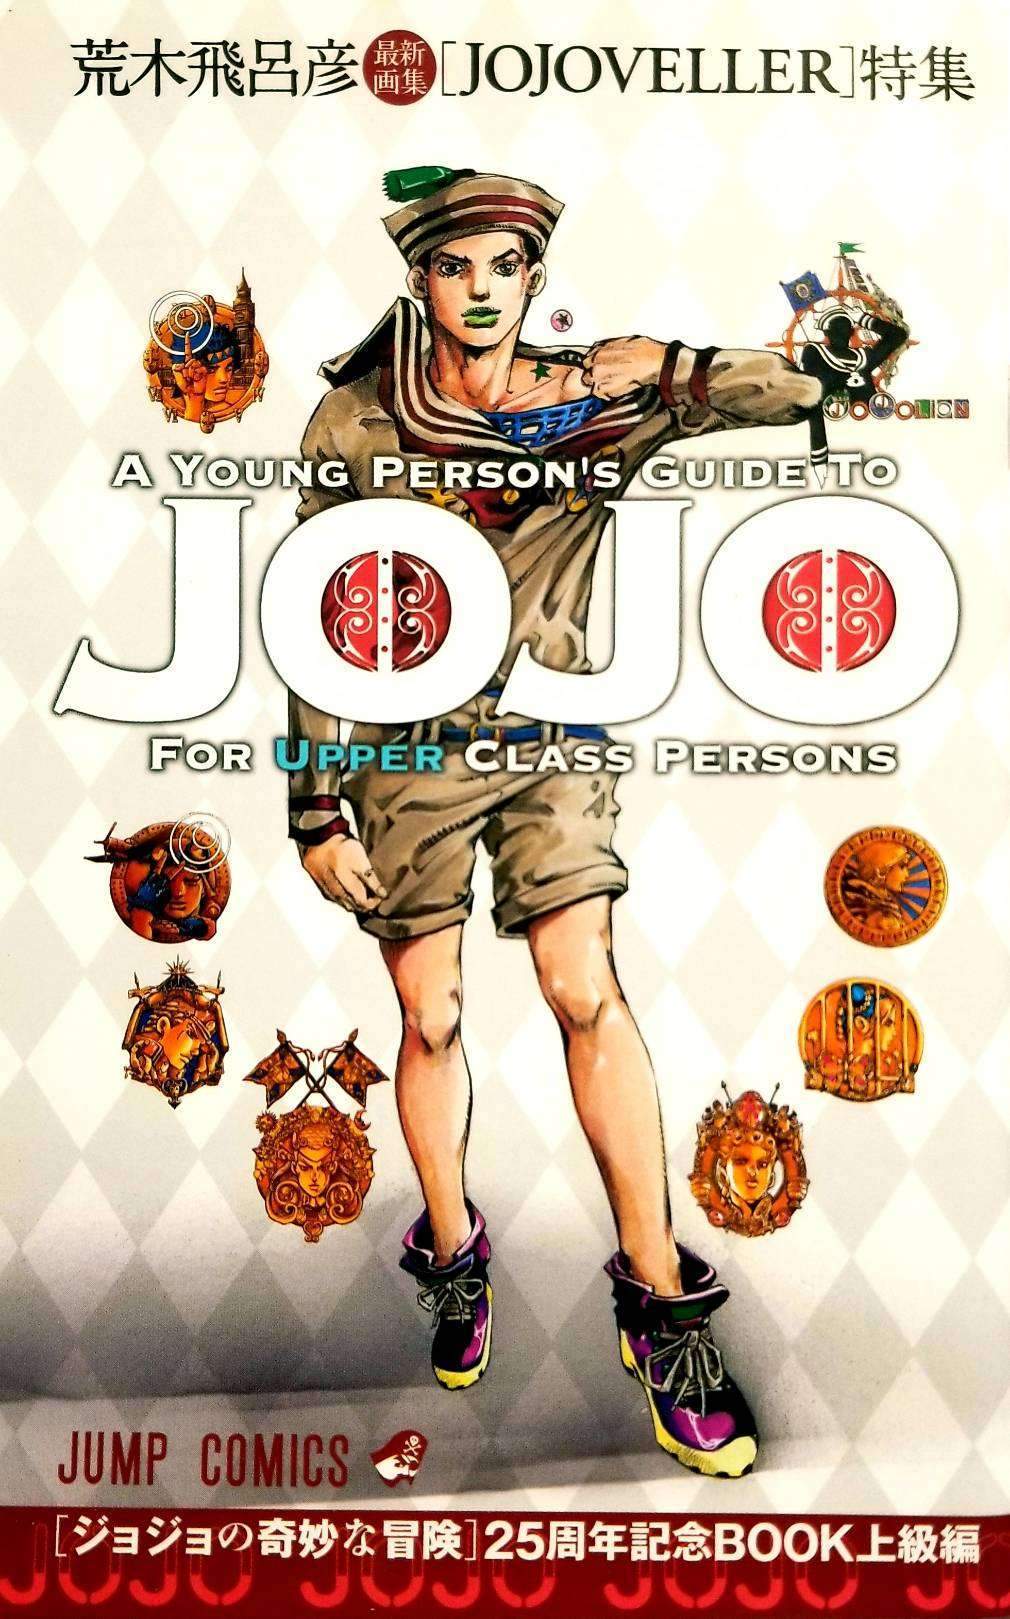 A Young Person's Guide to Jojo for Upper Class Persons – Trade